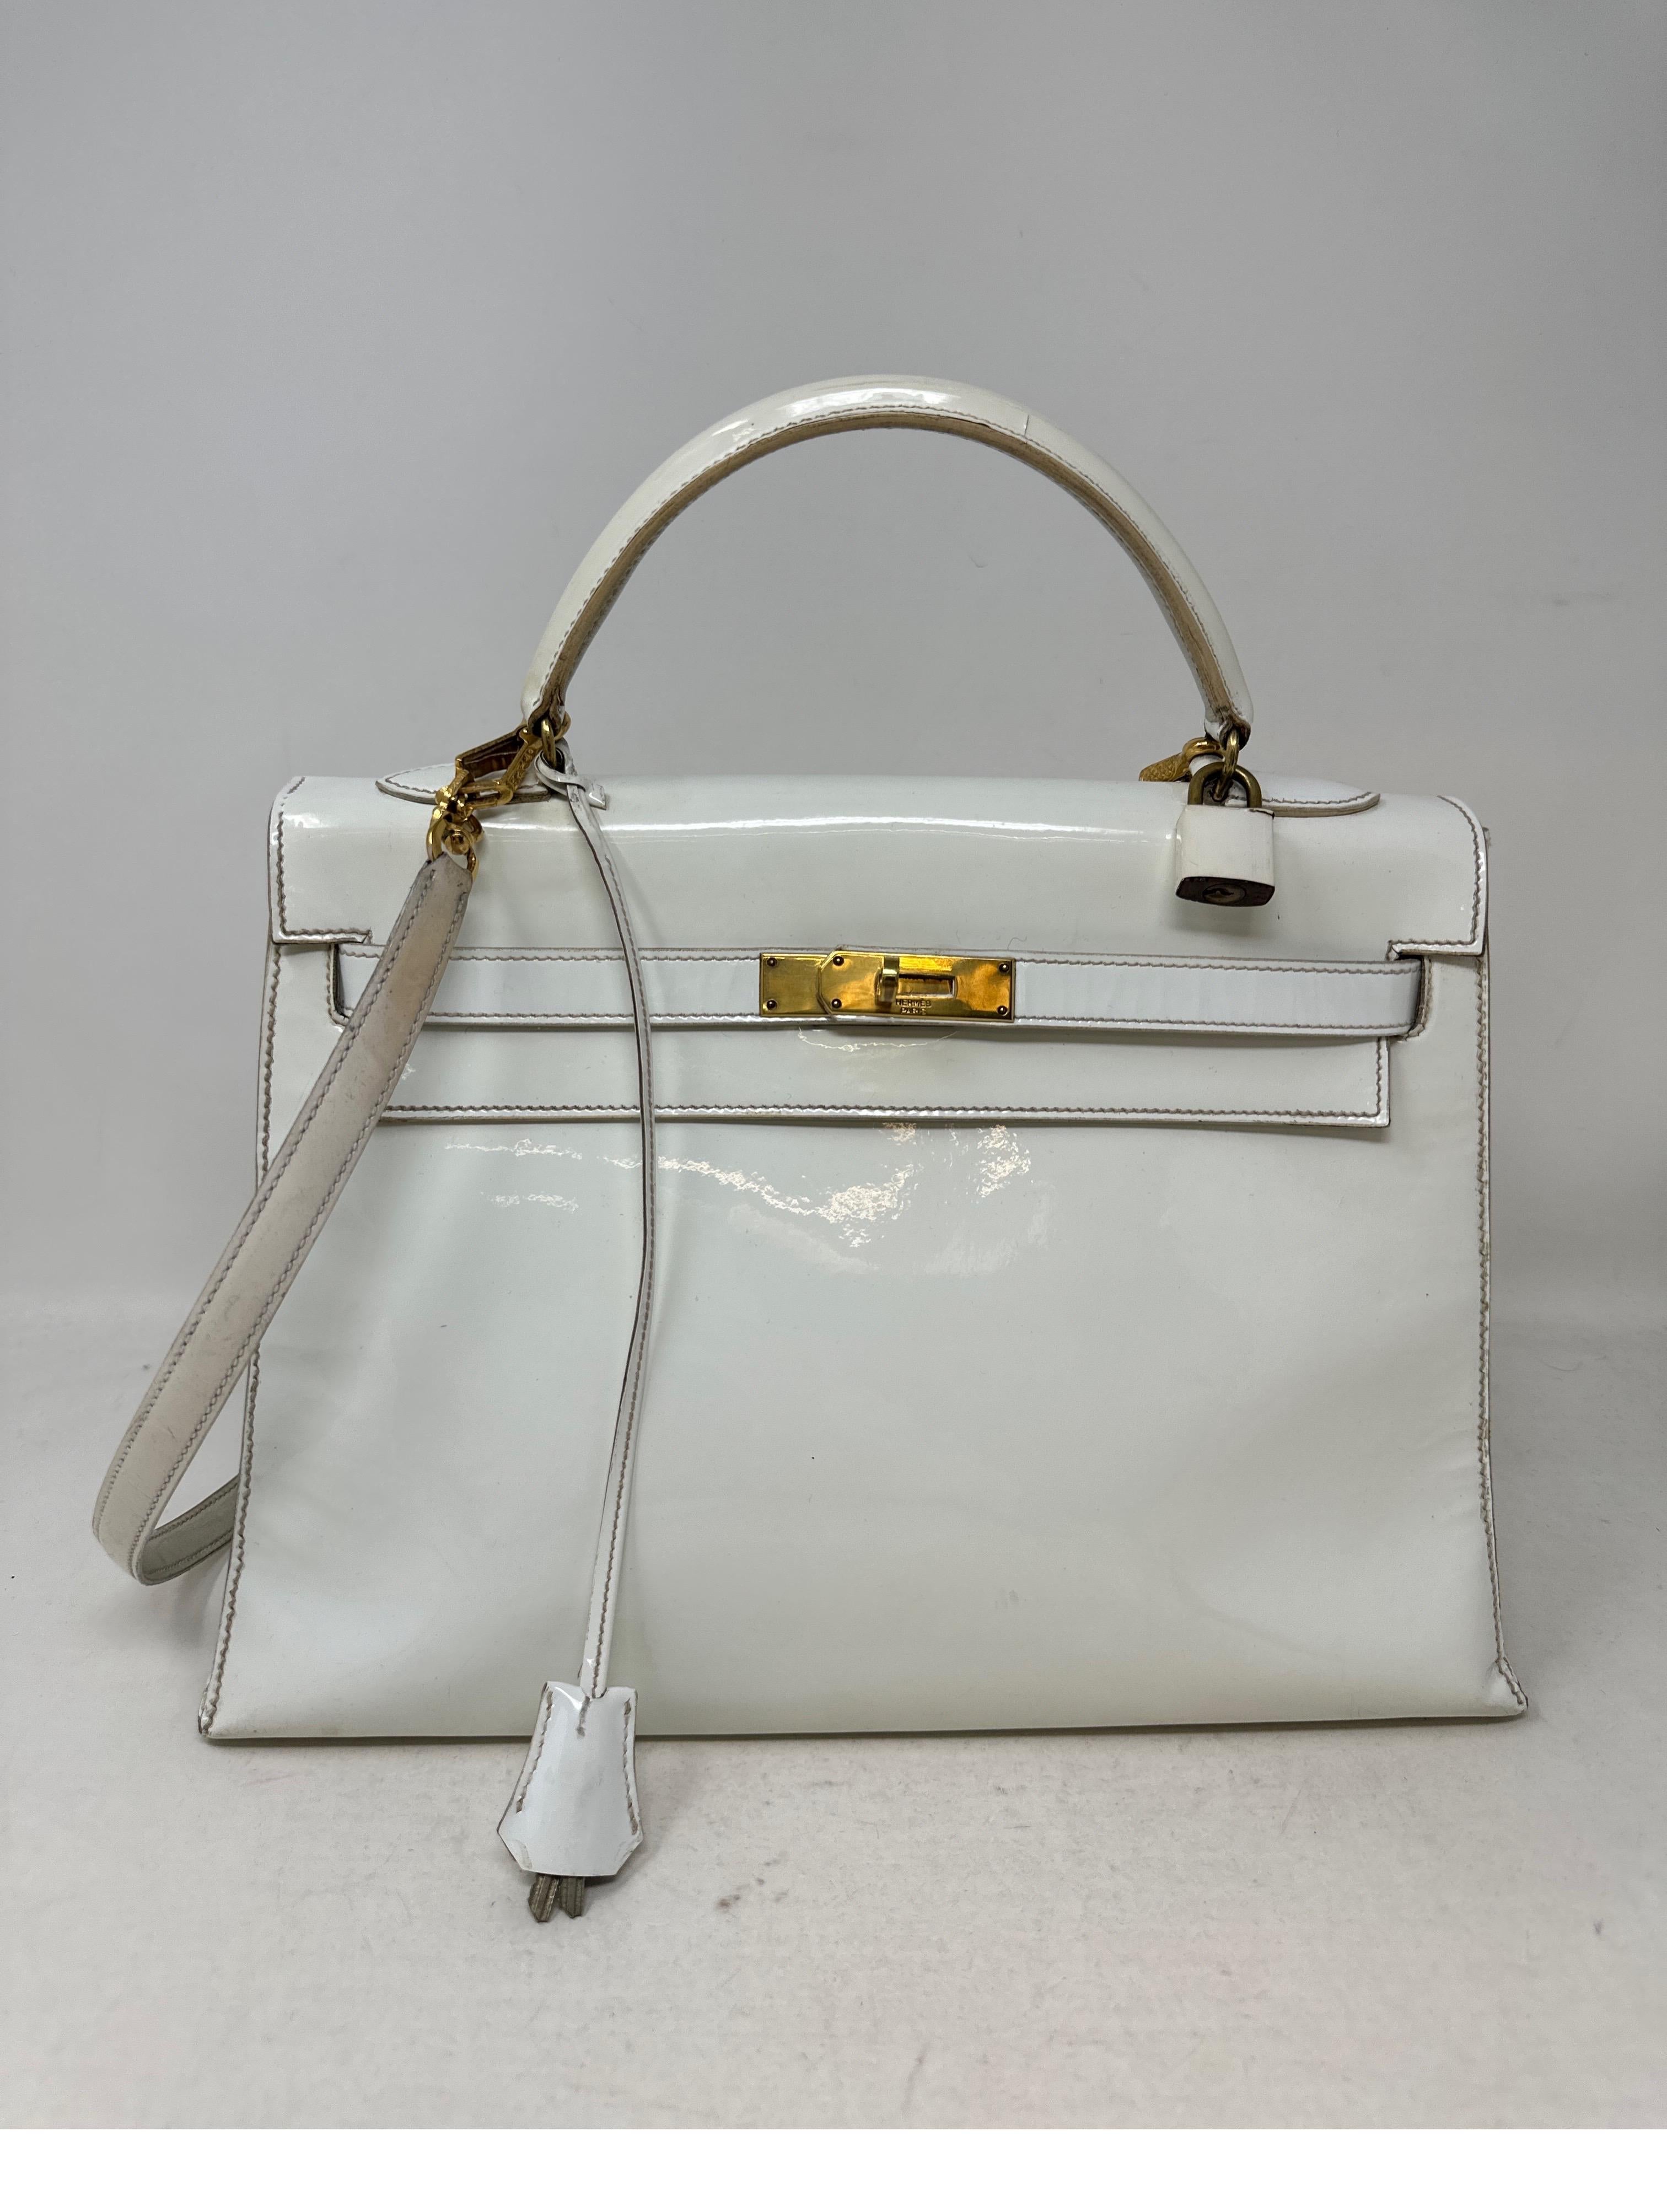 Hermes White Patent Leather Kelly Bag. Vintage rare bag from the 1960's. Collector's piece. Interior has some wear from age. Exterior has light wear from use and age. Please see all photos. For its age in good condition overall. Includes clochette,